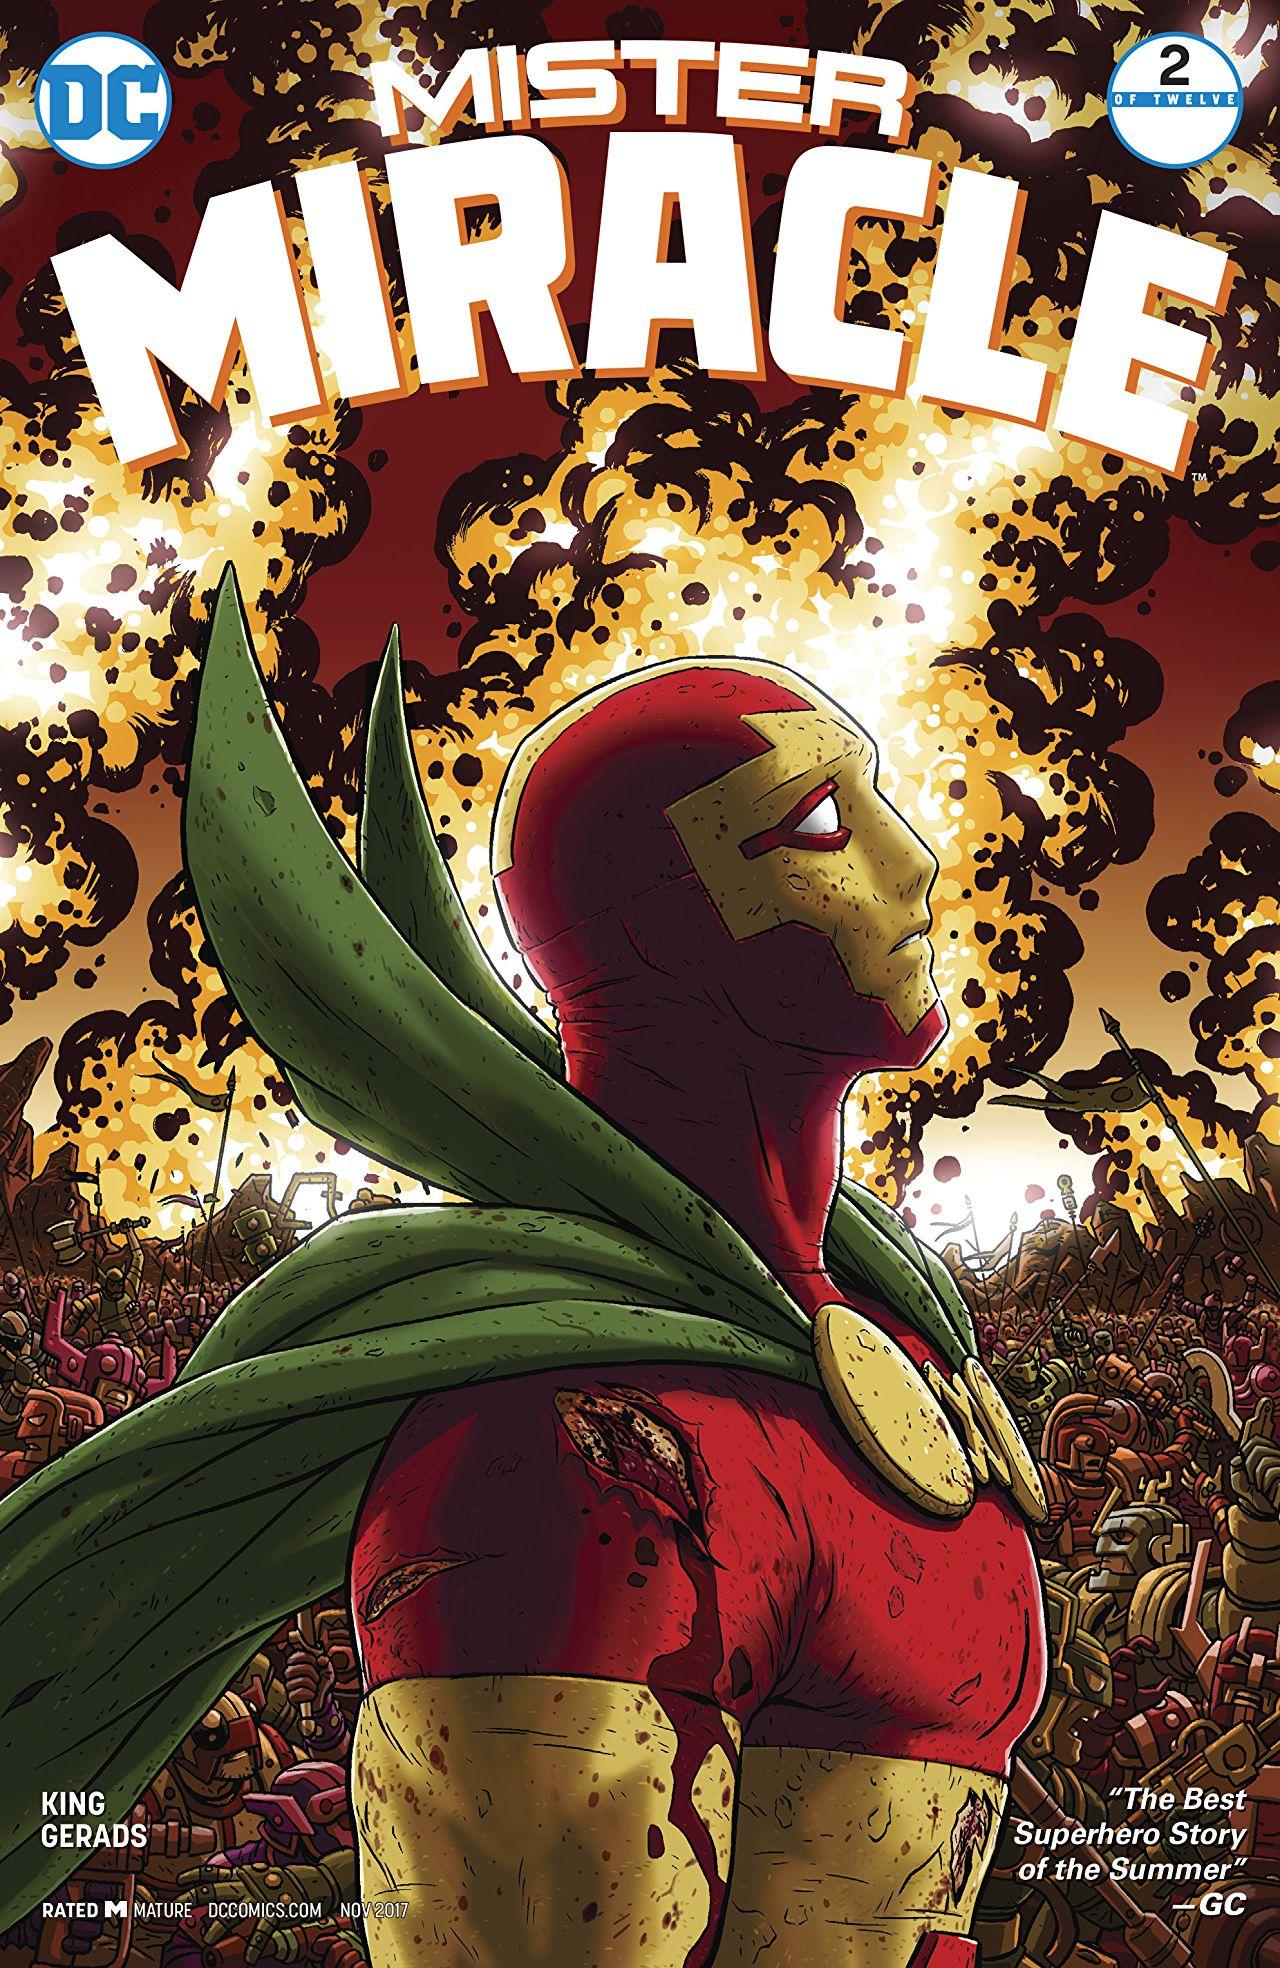 Mister Miracle Vol. 4 #2